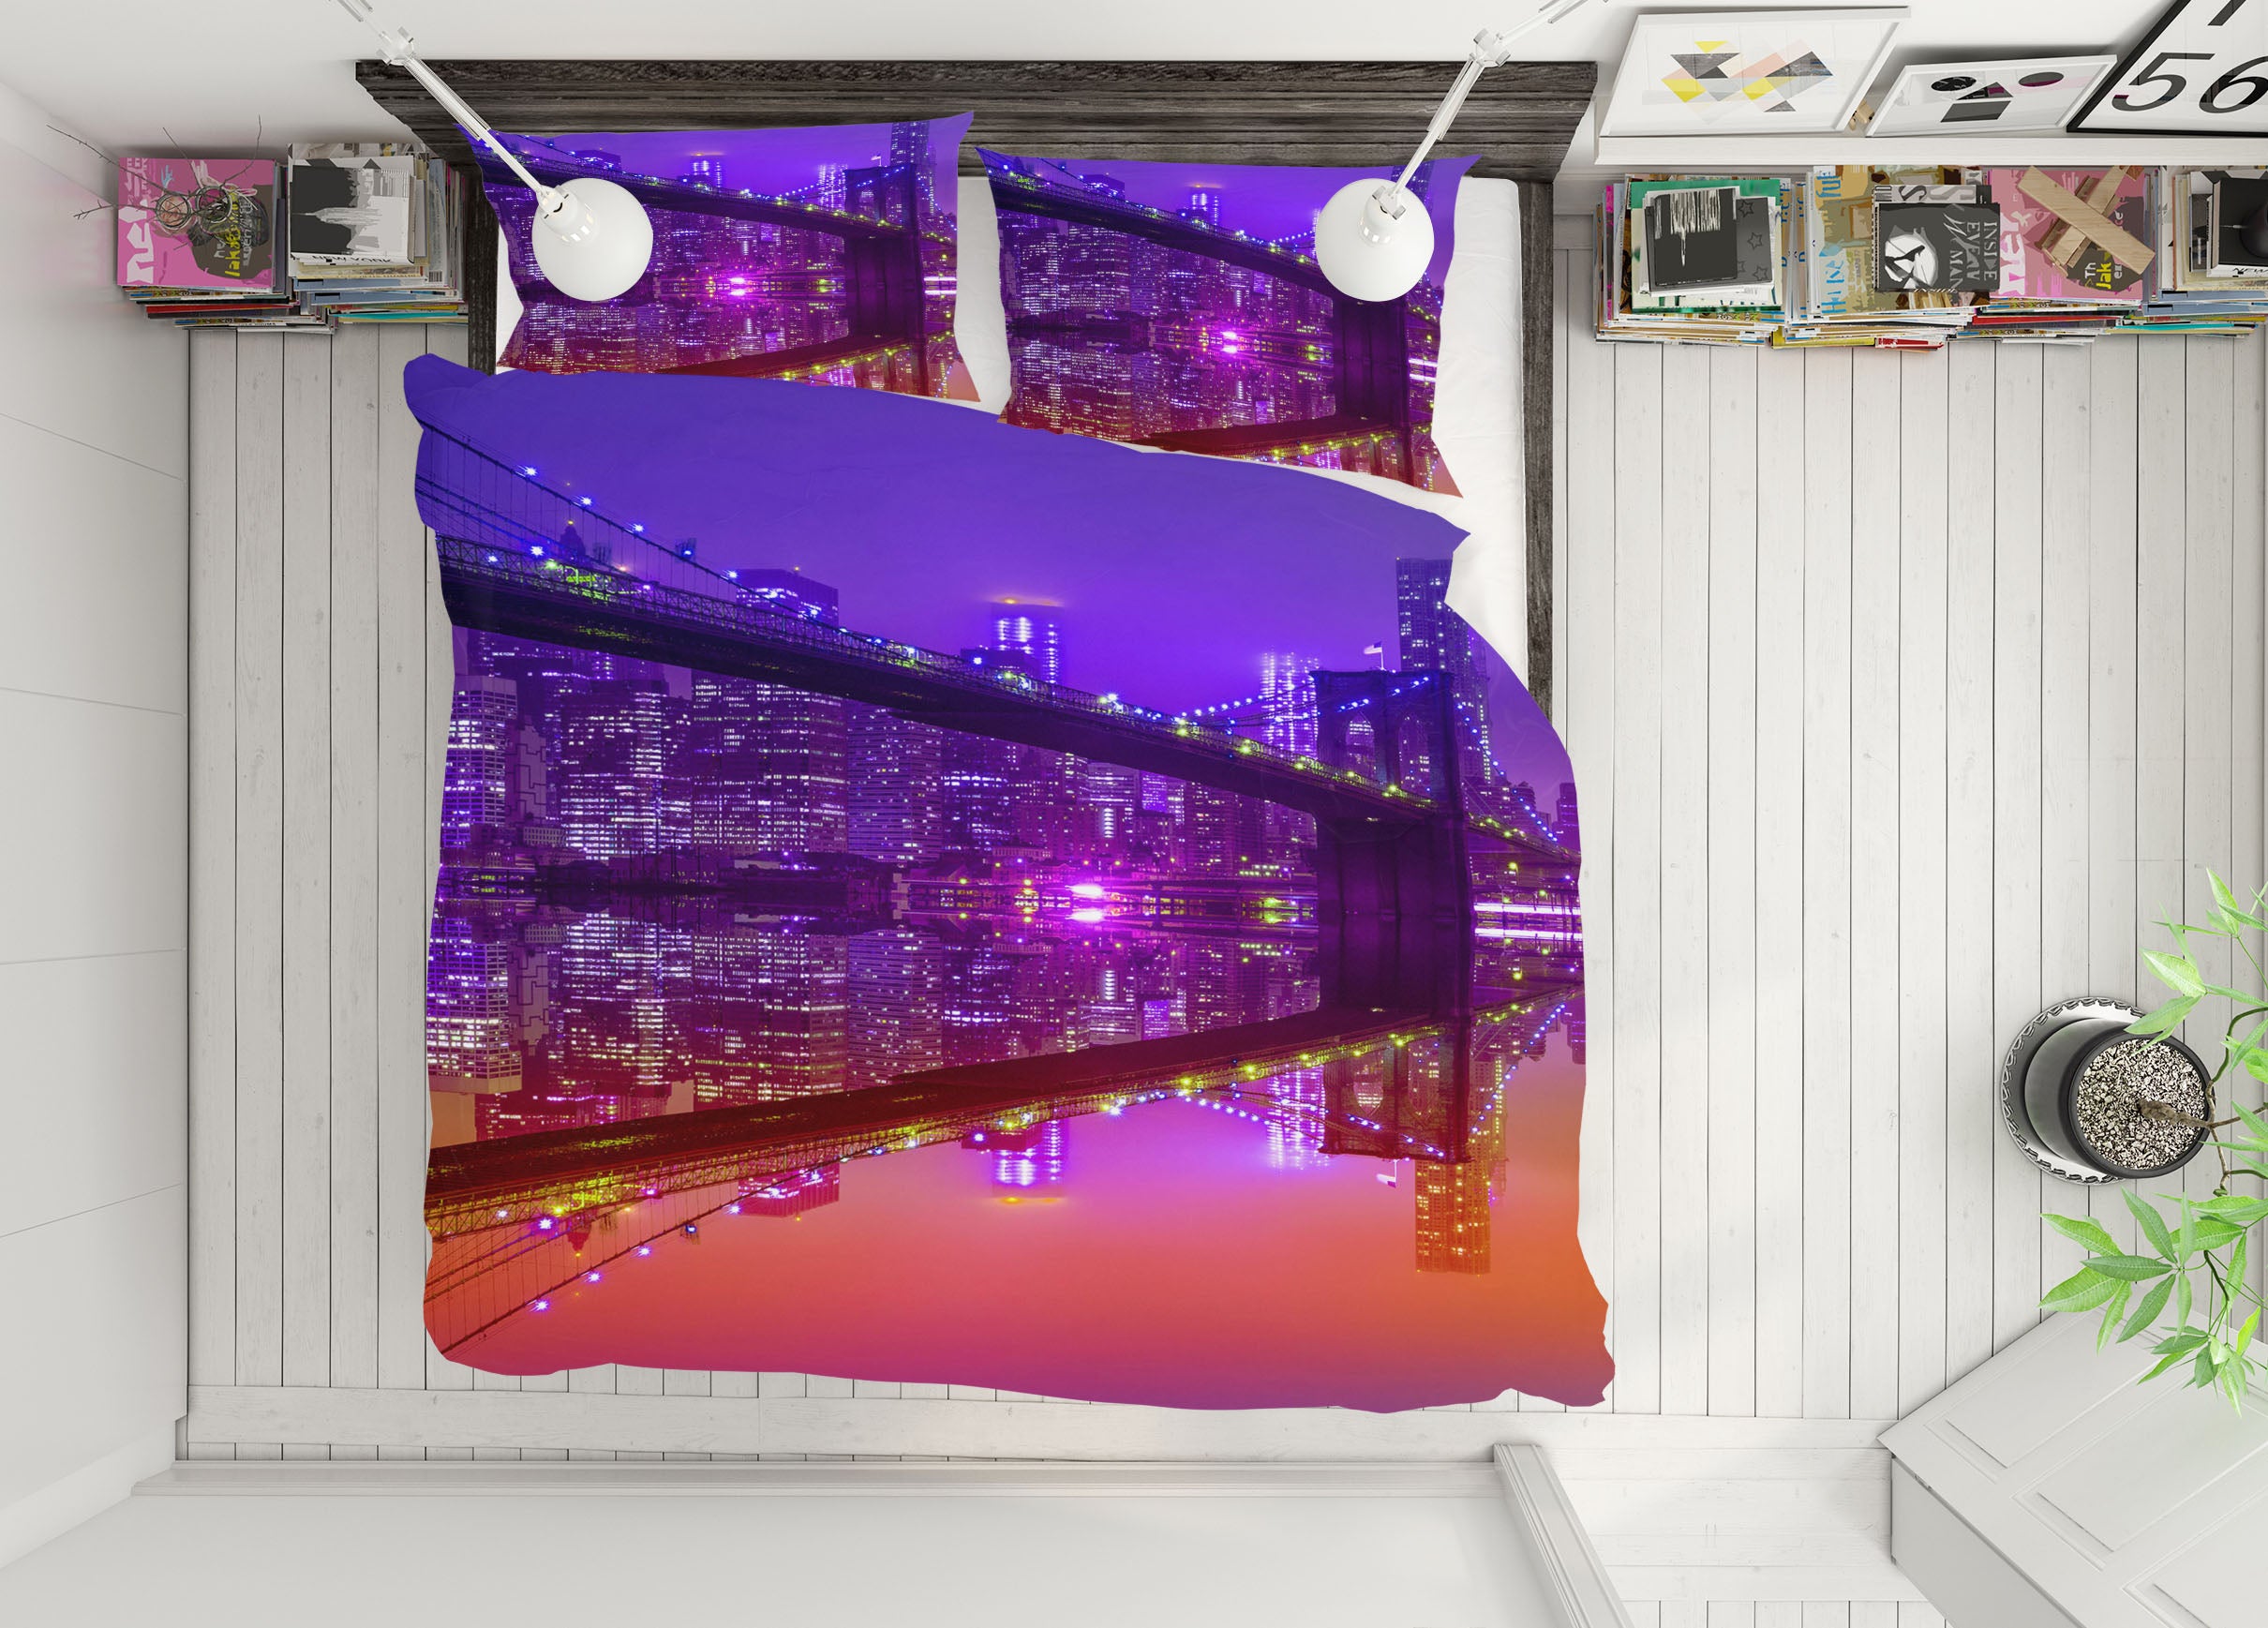 3D Brooklyn Over The Sunset 016 Marco Carmassi Bedding Bed Pillowcases Quilt